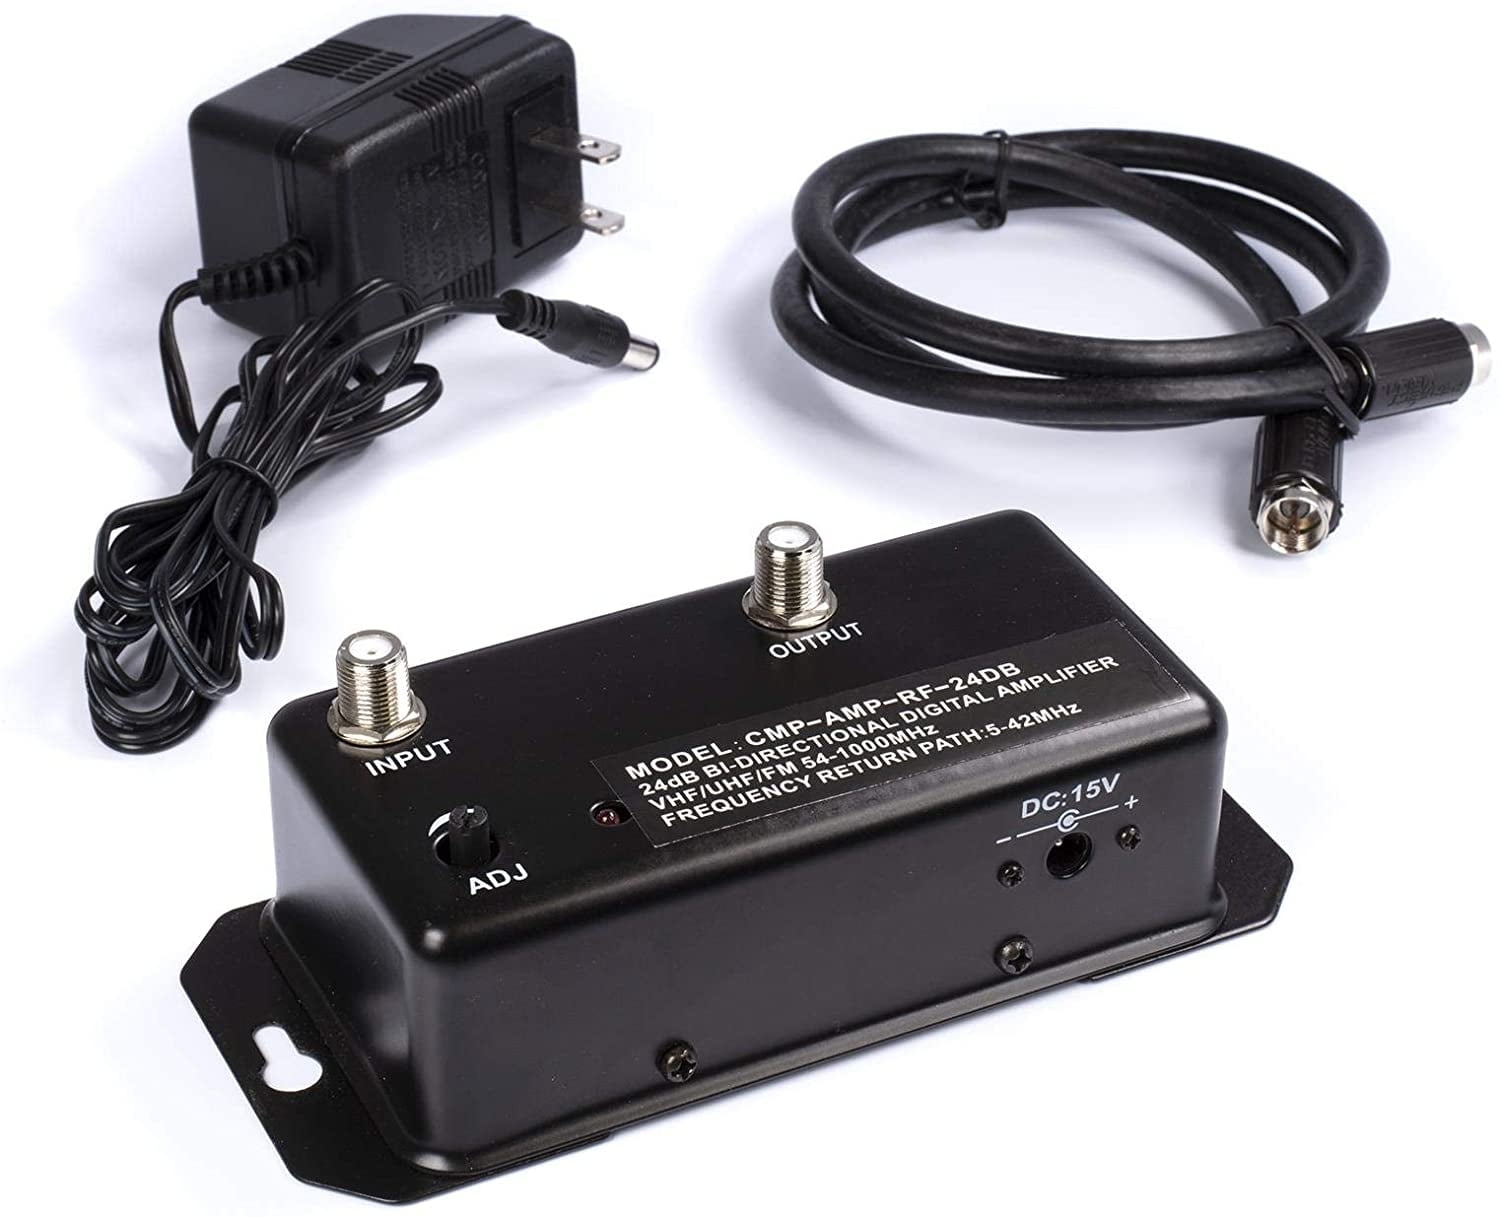 THE CIMPLE CO - 24dB TV Antenna Digital Signal Booster Amplifier for HDTV  Cable - w/ Coax Cable 